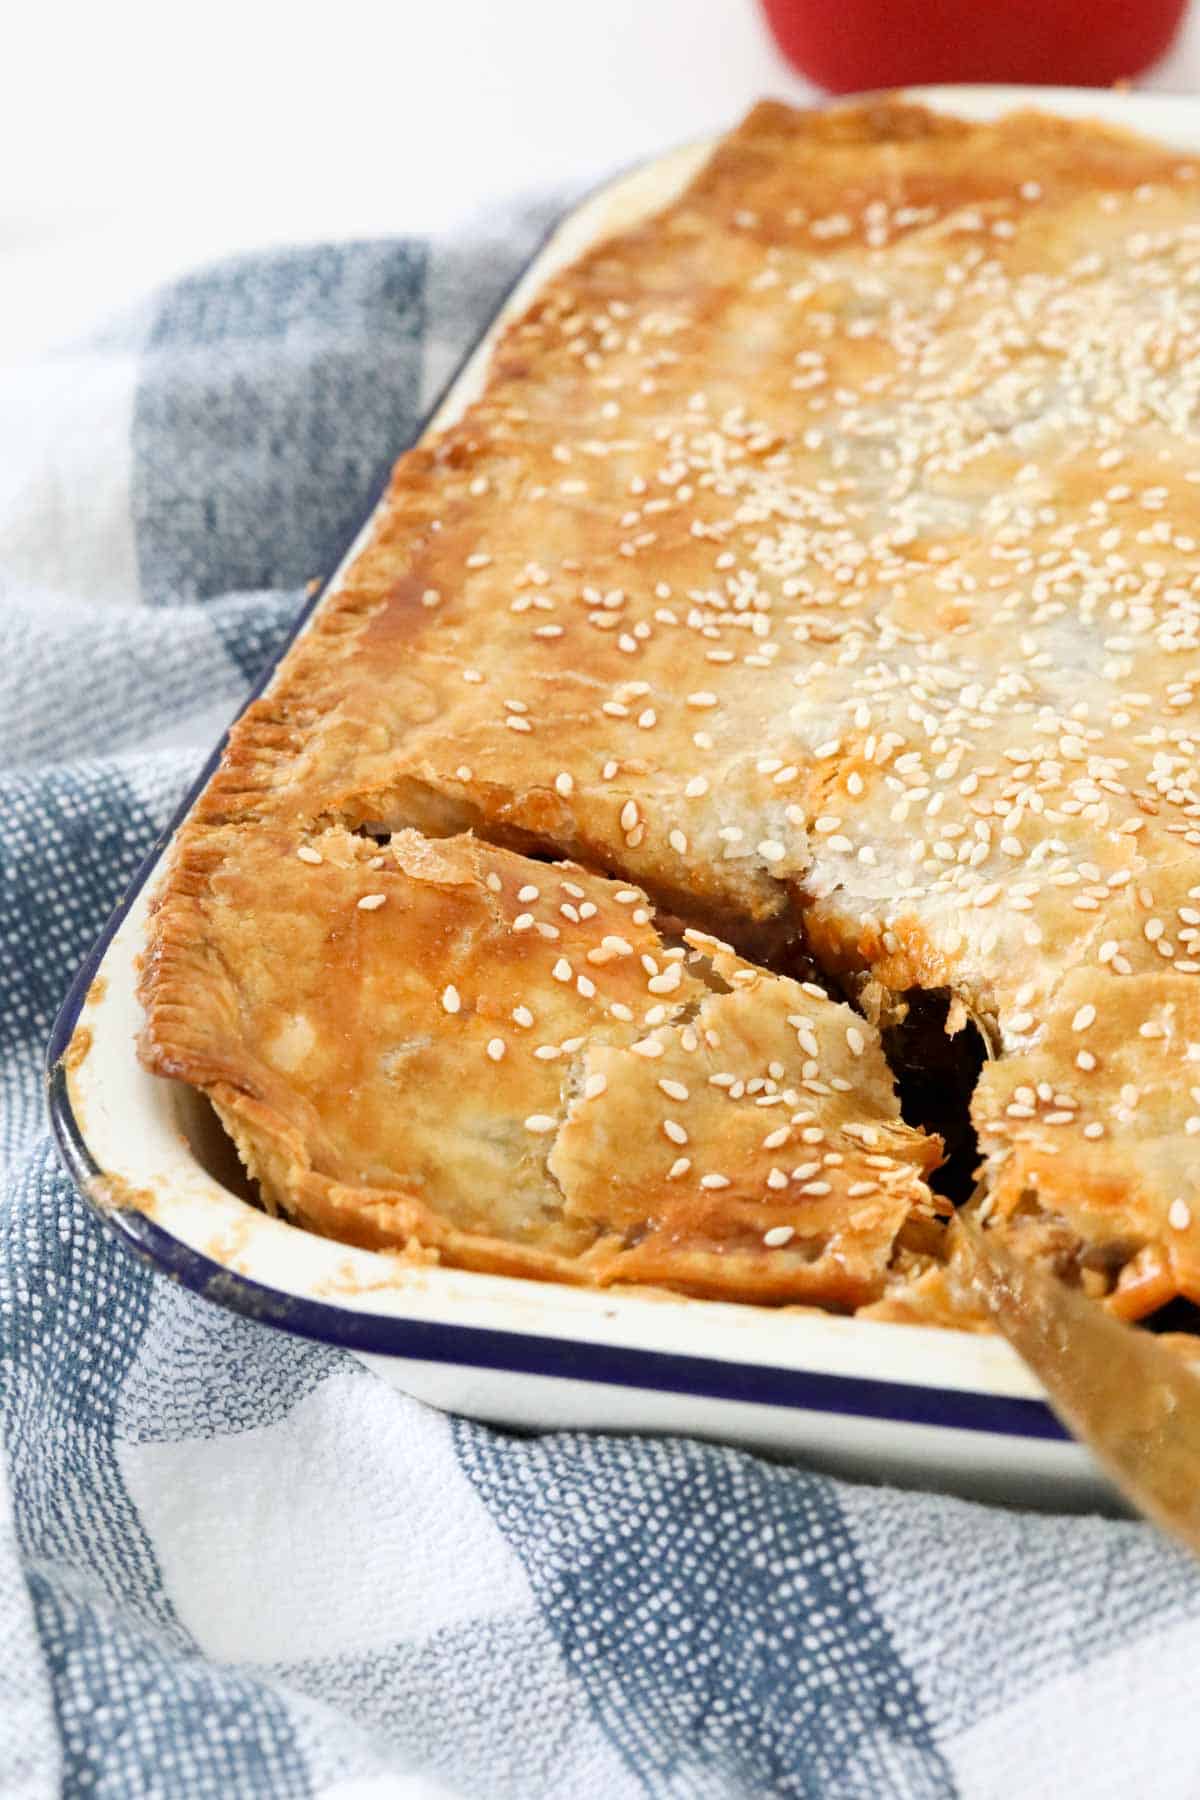 A golden puff pastry steak and mushroom pie in a baking tin.